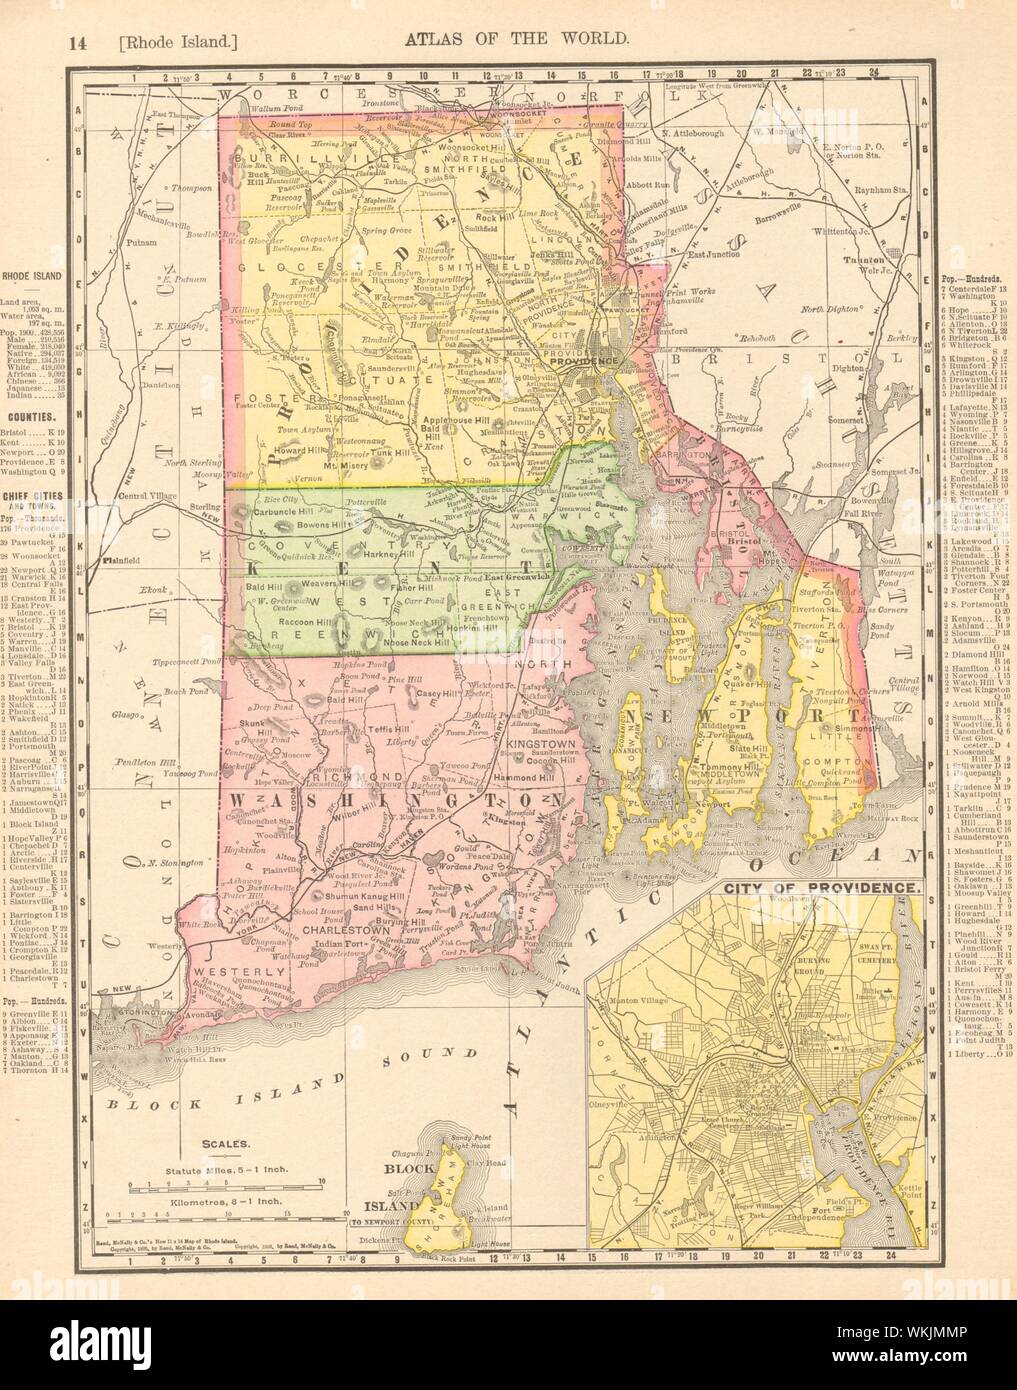 Rhode Island state map showing counties. Providence inset. RAND MCNALLY 1906 Stock Photo